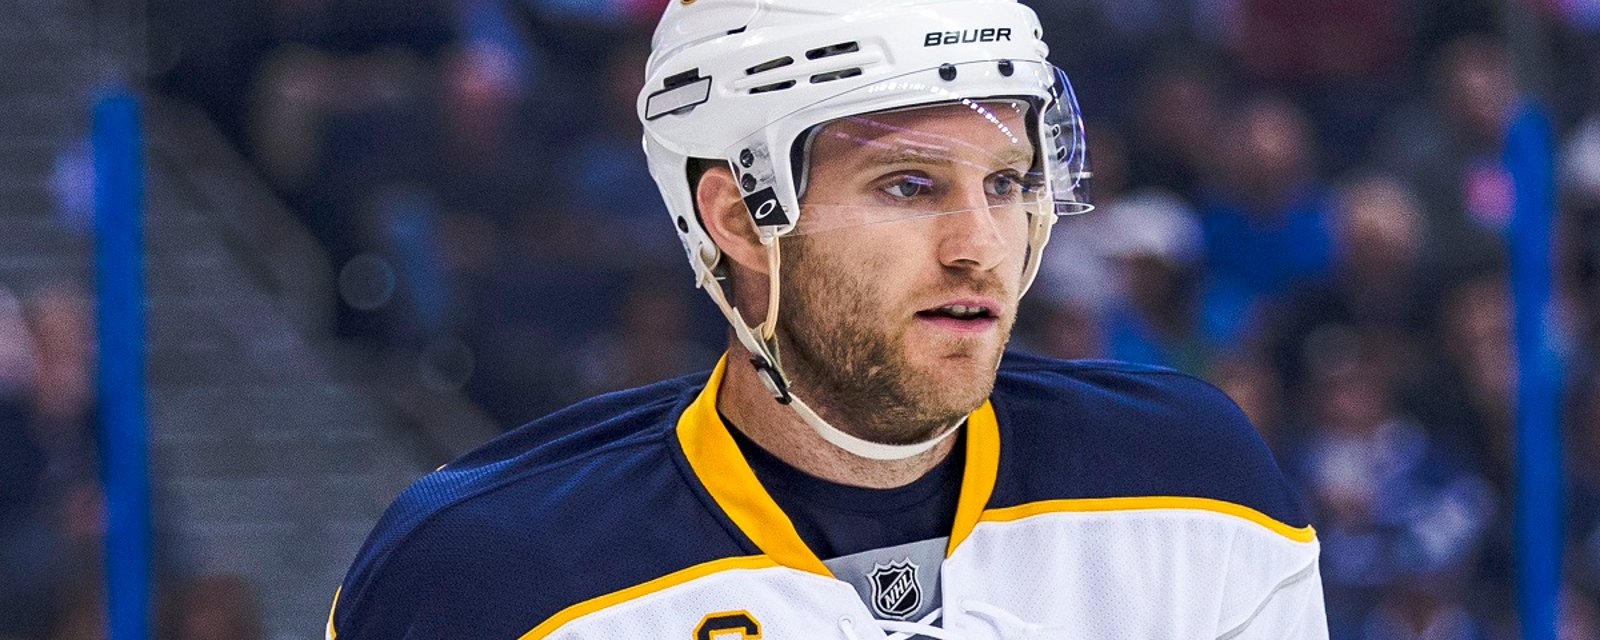 Rumor: Free agent defenseman Cody Franson may be close to signing with a new team.